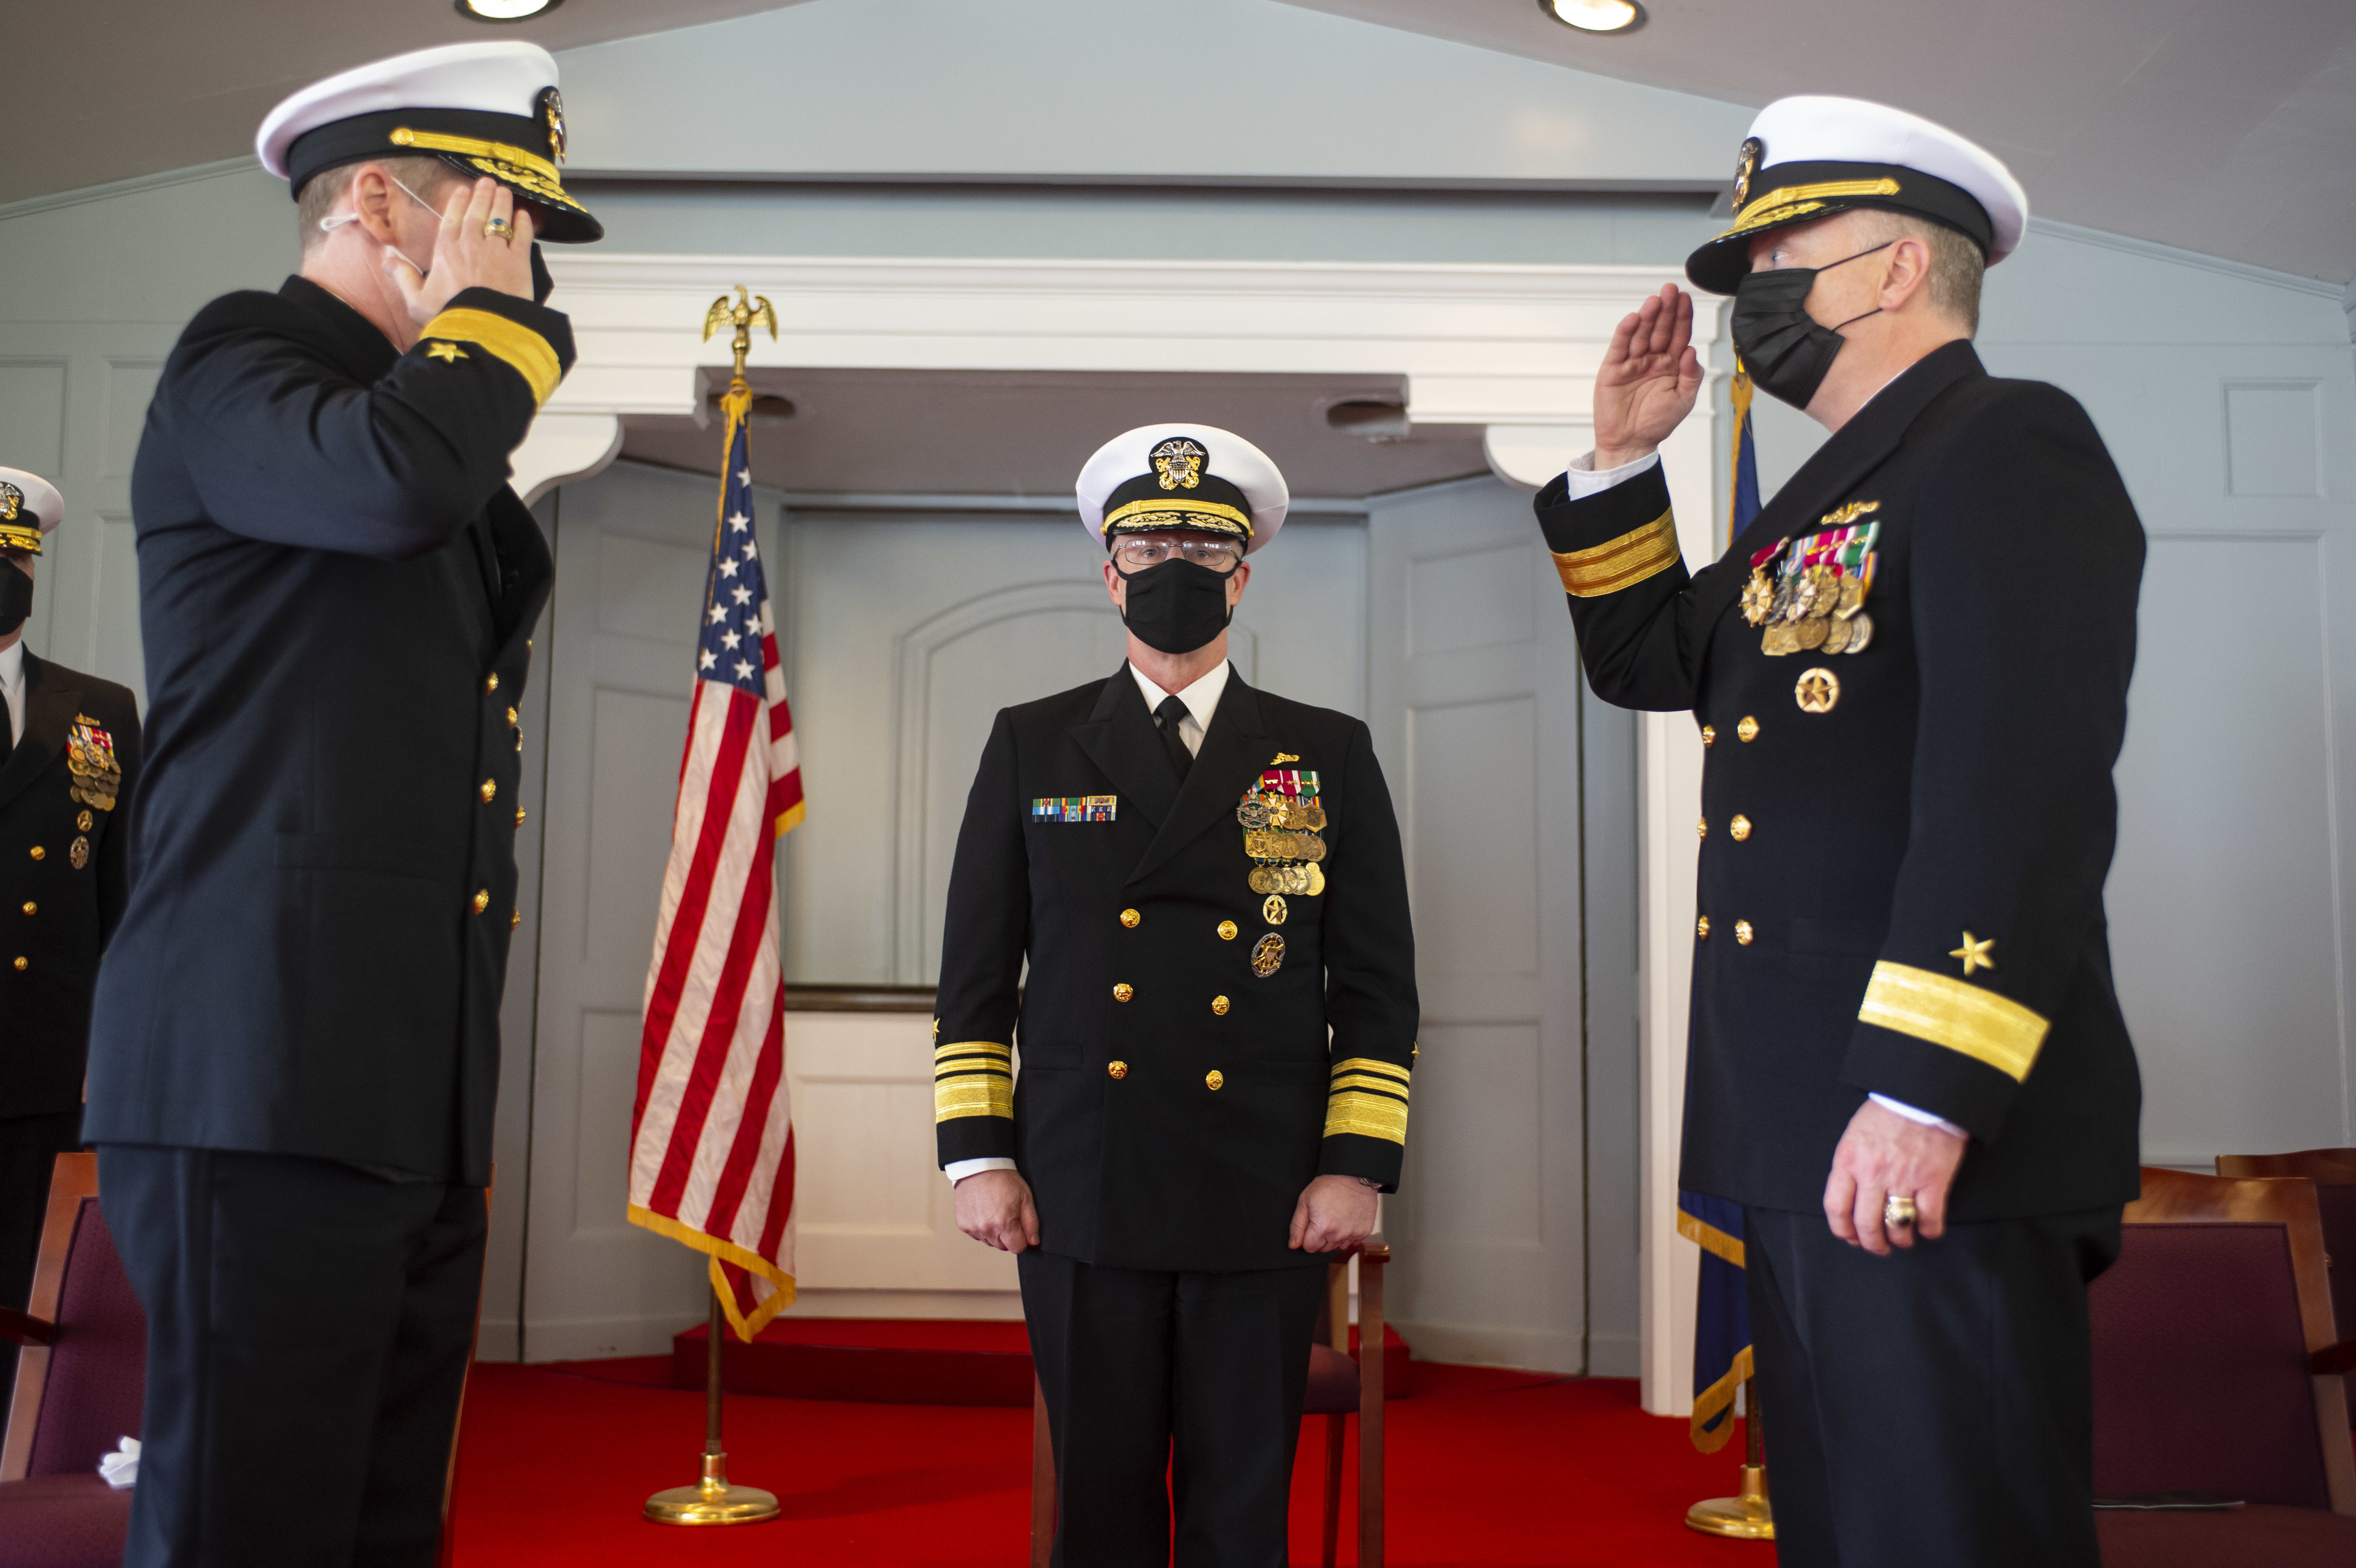 Change of command ceremony for Commander, Submarine Group Two (SUBGRU2) at Naval Support Activity Hampton Roads in Norfolk, Va., March 26, 2021.